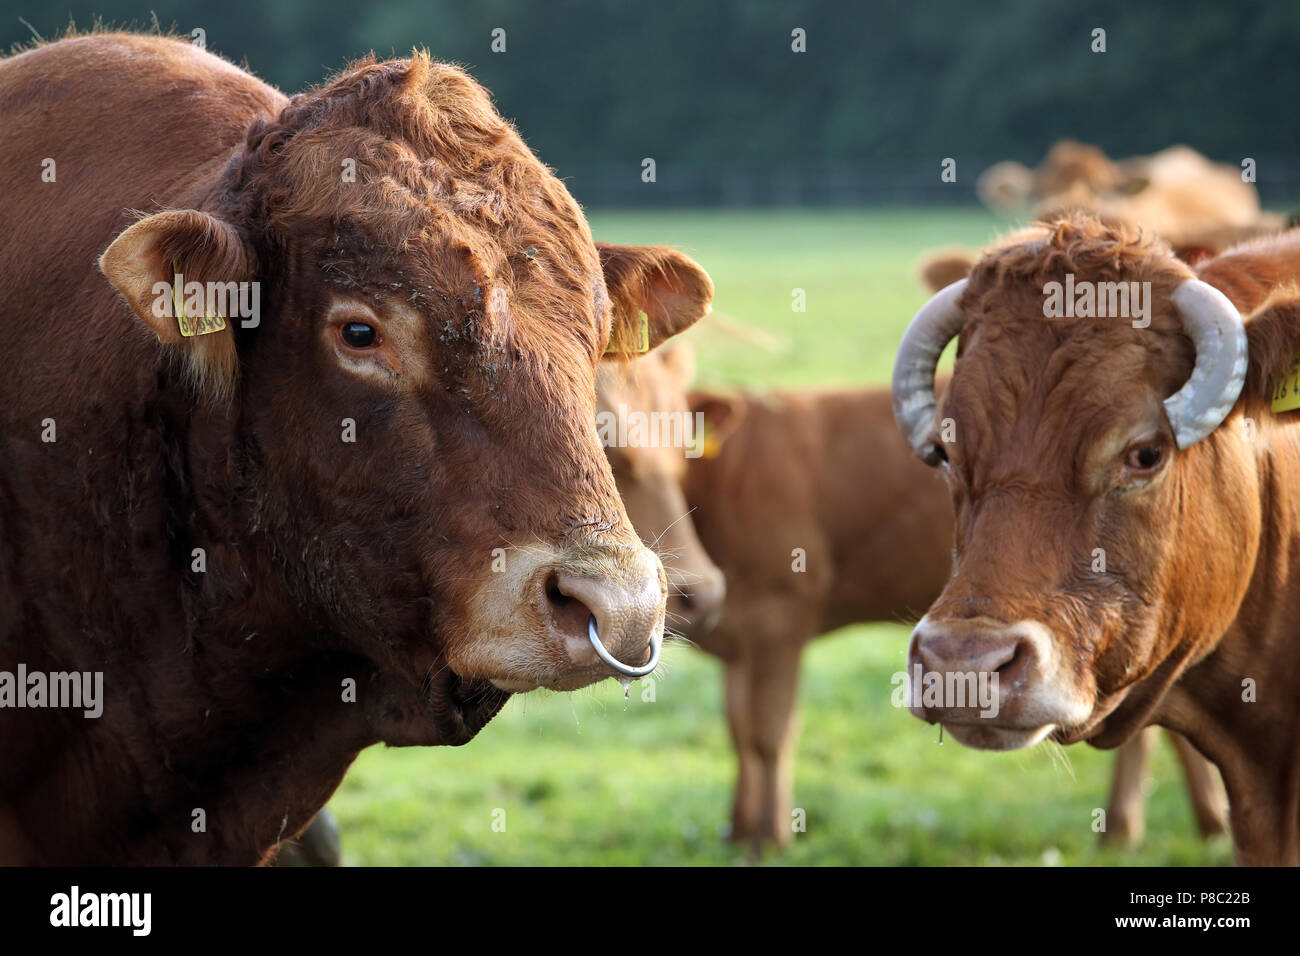 Ascheberg-Herbern, Germany, cattle on a pasture look attentively to the viewer Stock Photo